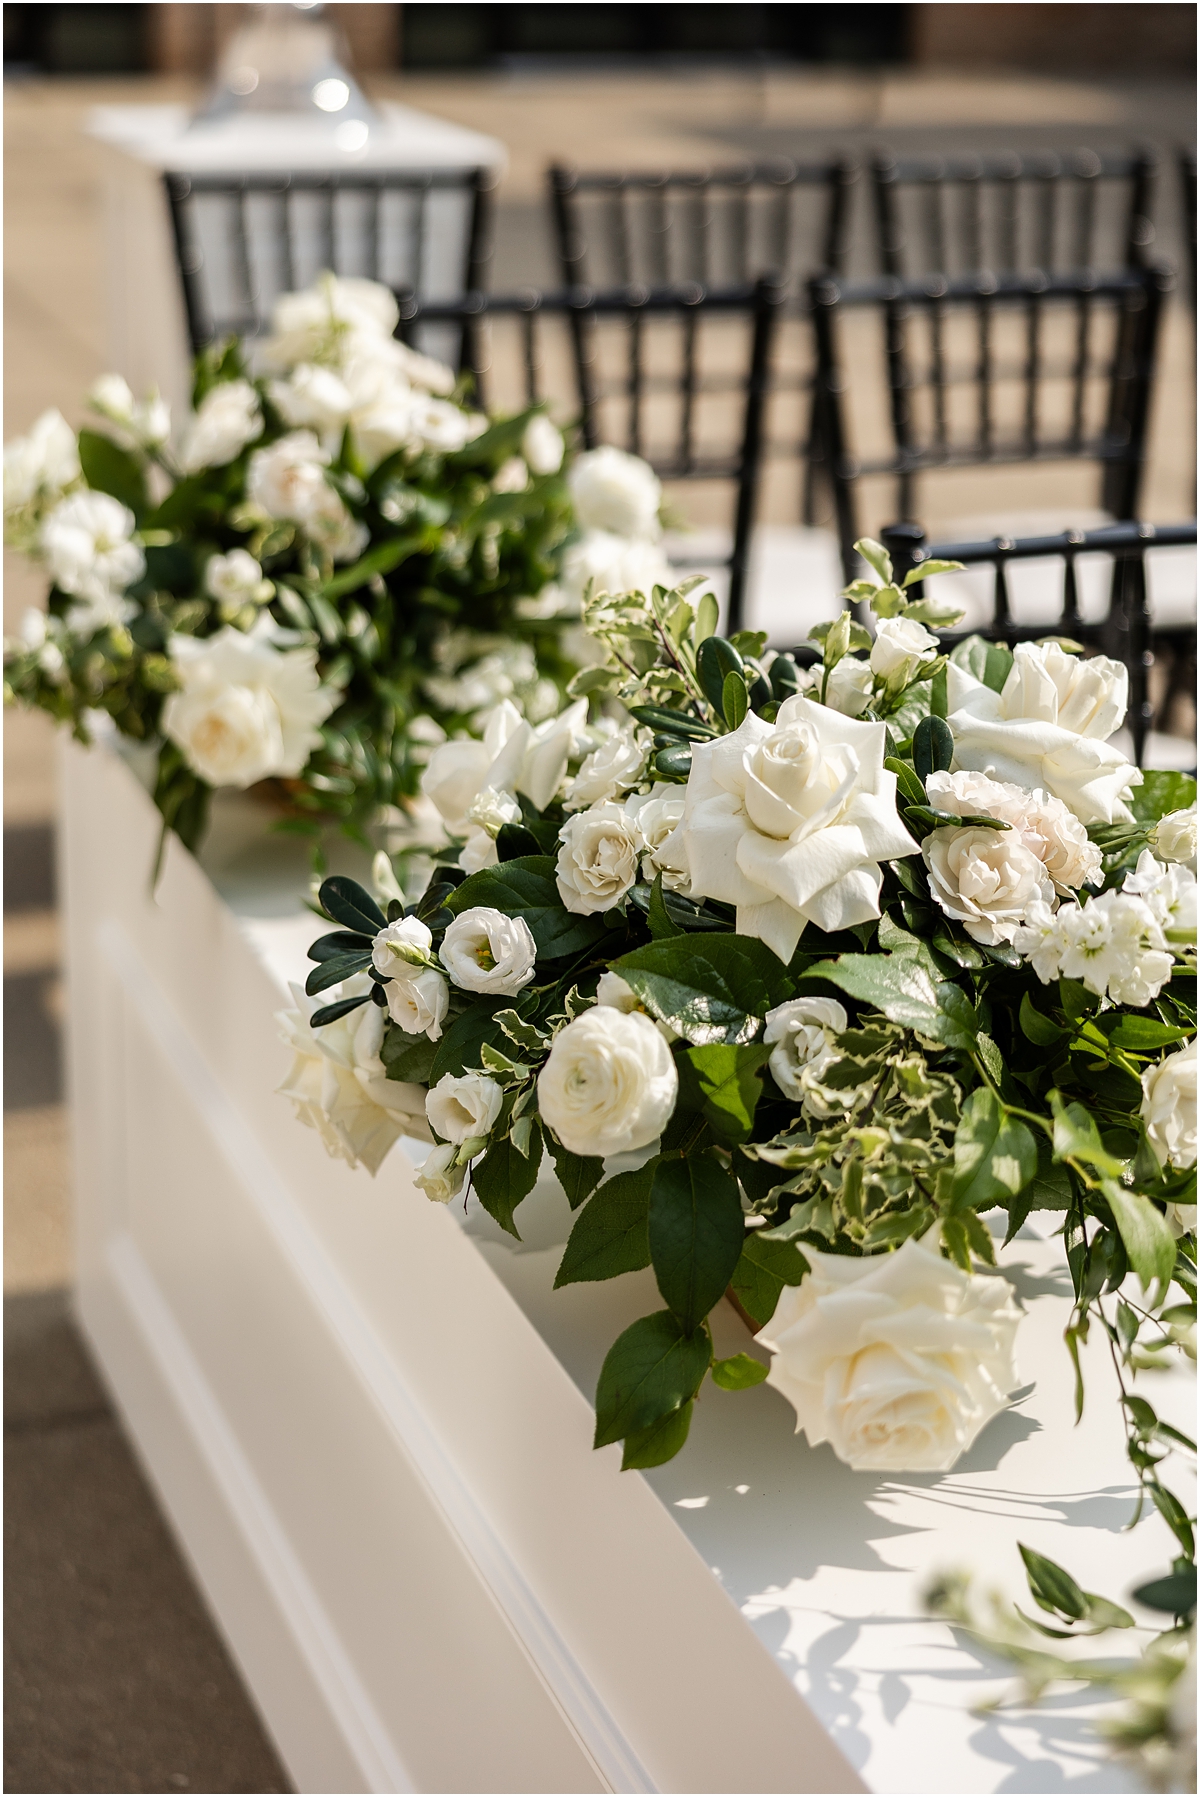 chic and classic wedding flower arrangements from garden inspired wedding ceremony at Revel Motor Row